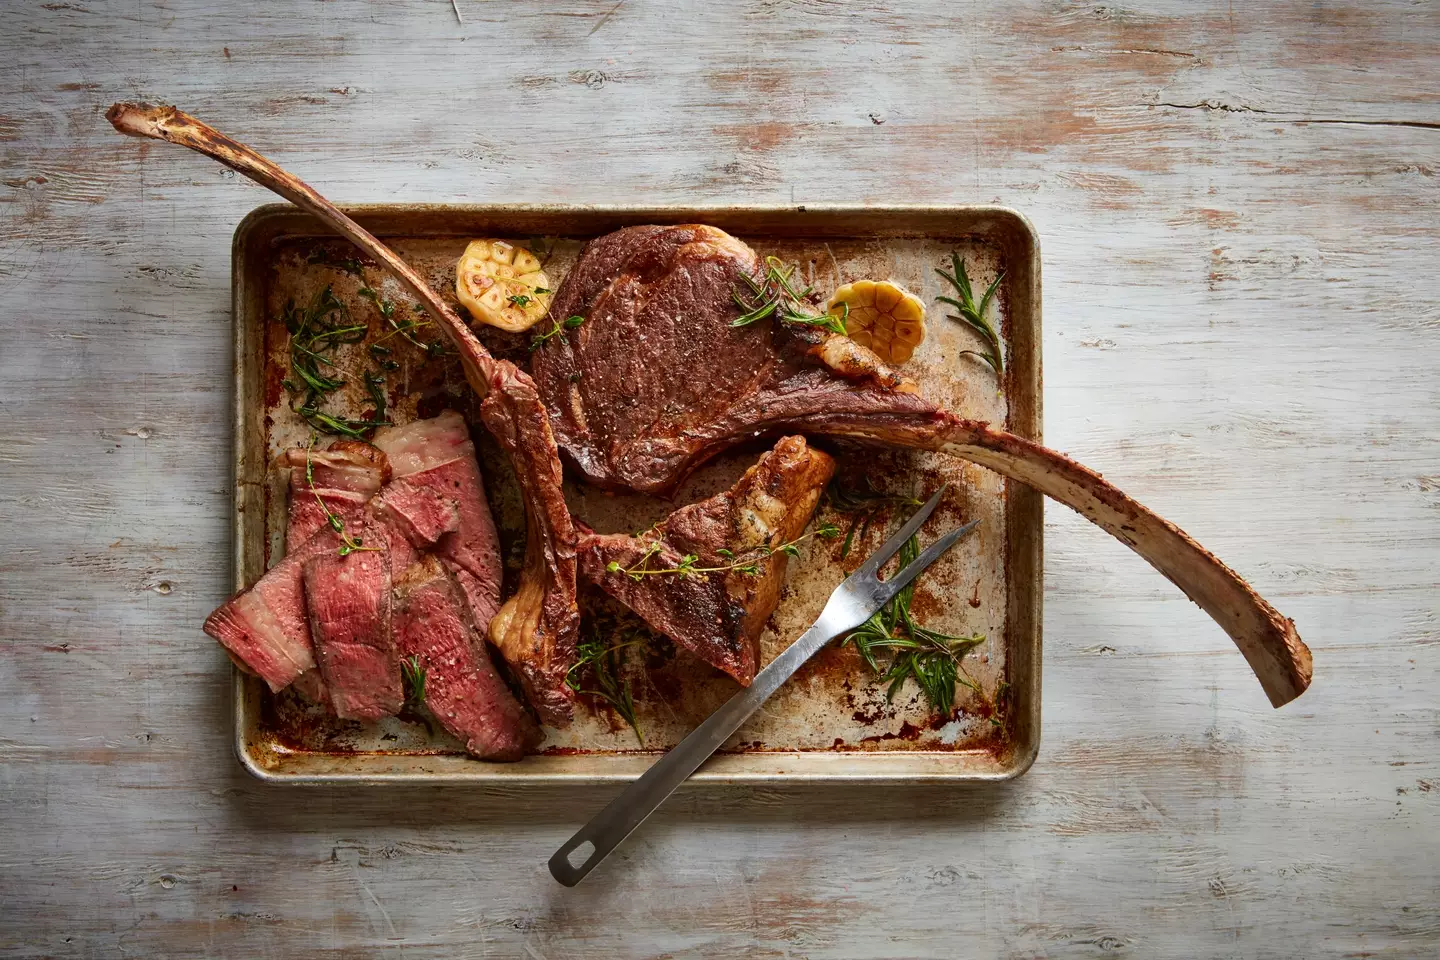 A tomahawk steak isn't exactly the cheapest option.